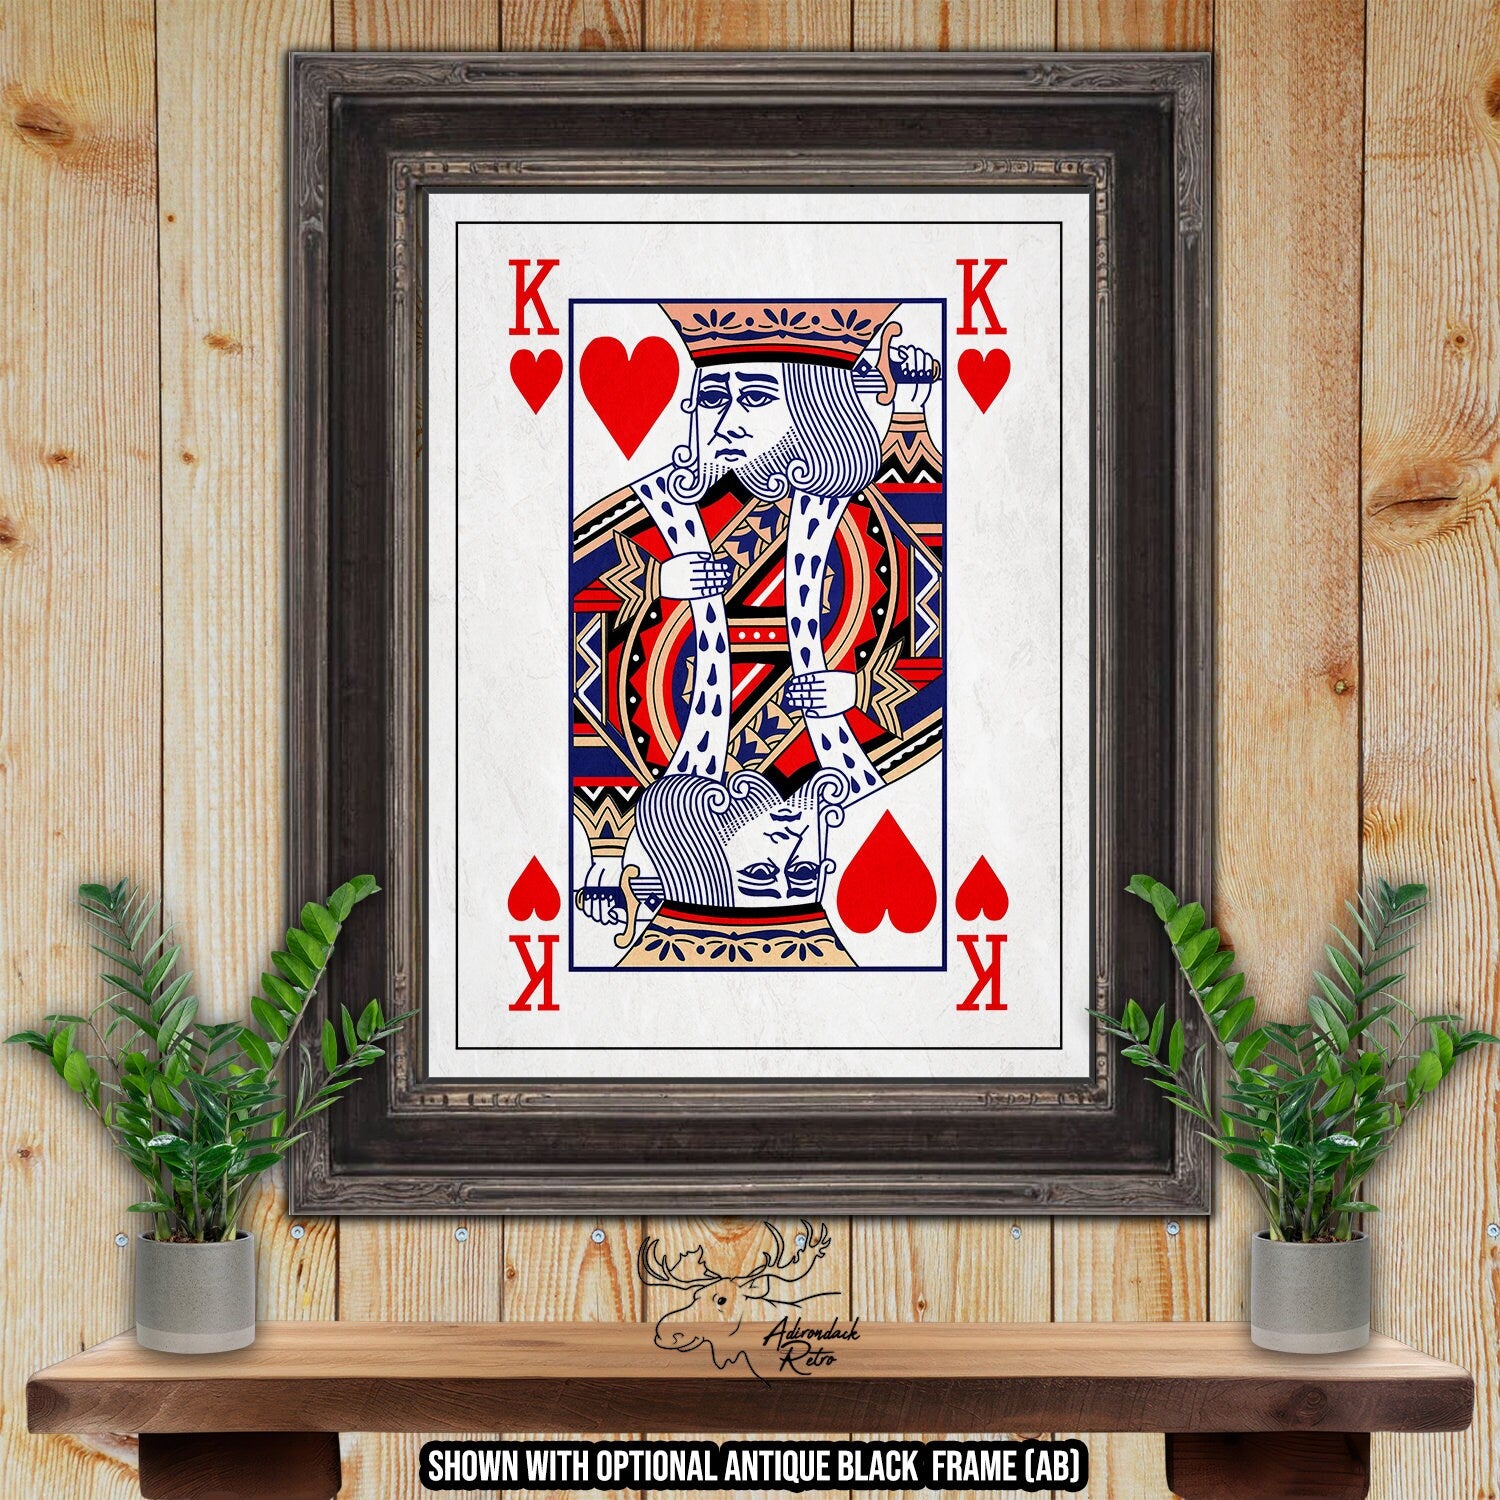 King of Hearts Fine Art Poker Print - Suicide King Playing Card Poster at Adirondack Retro